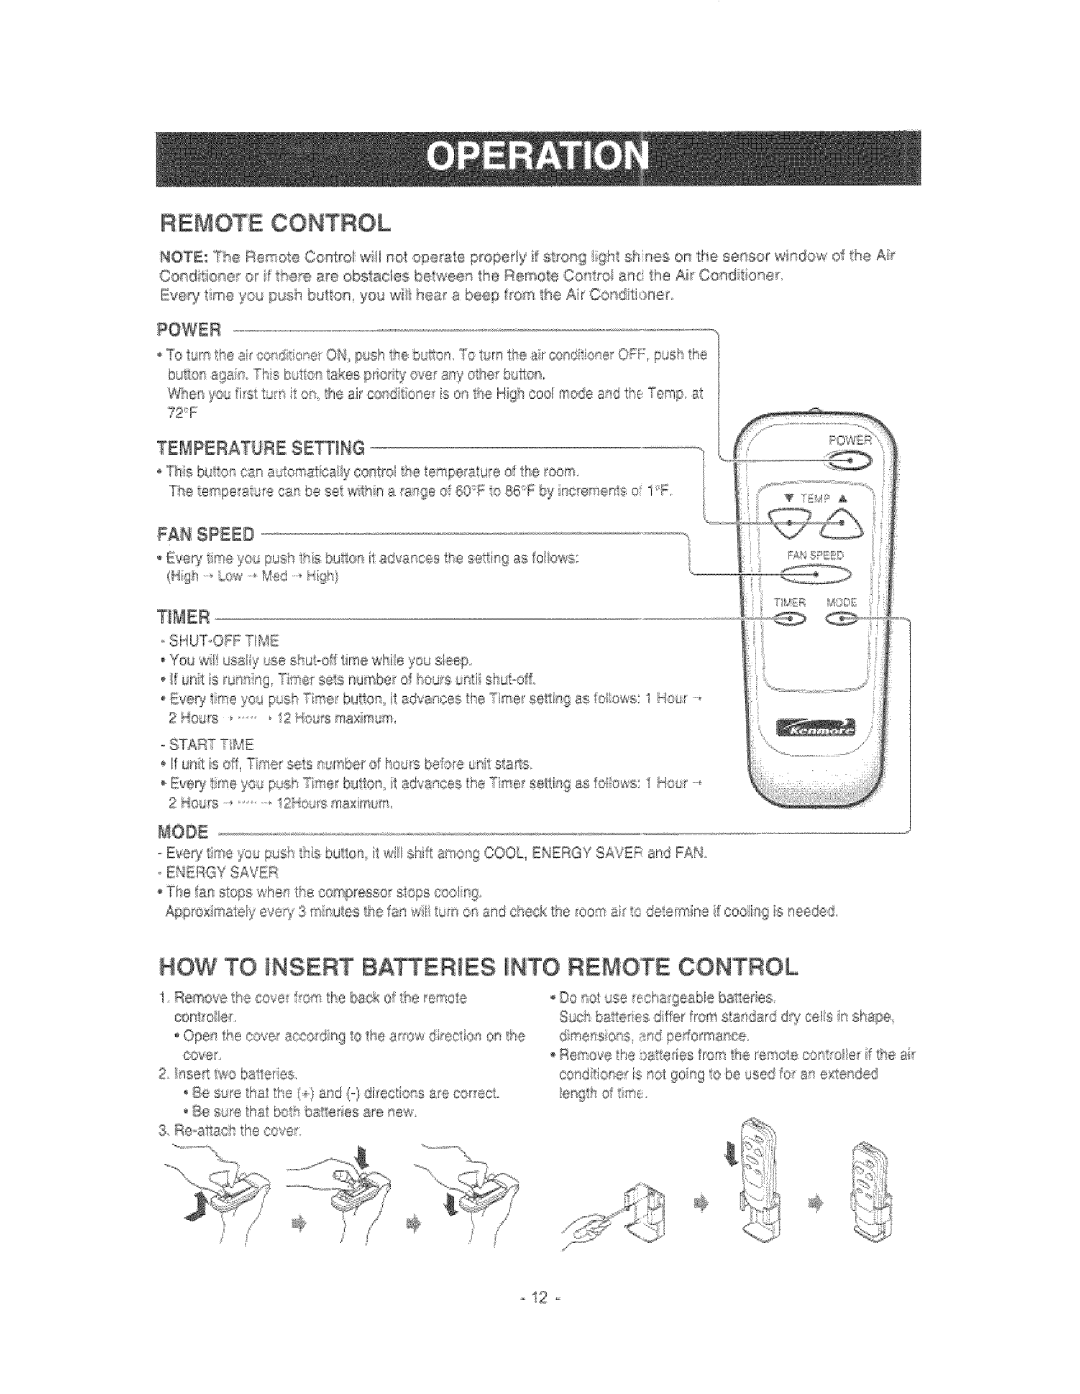 Kenmore 580.76081 manual Remote Control, HOW TO tNSERT BATTERIES NTO REMOTE CONTROL 